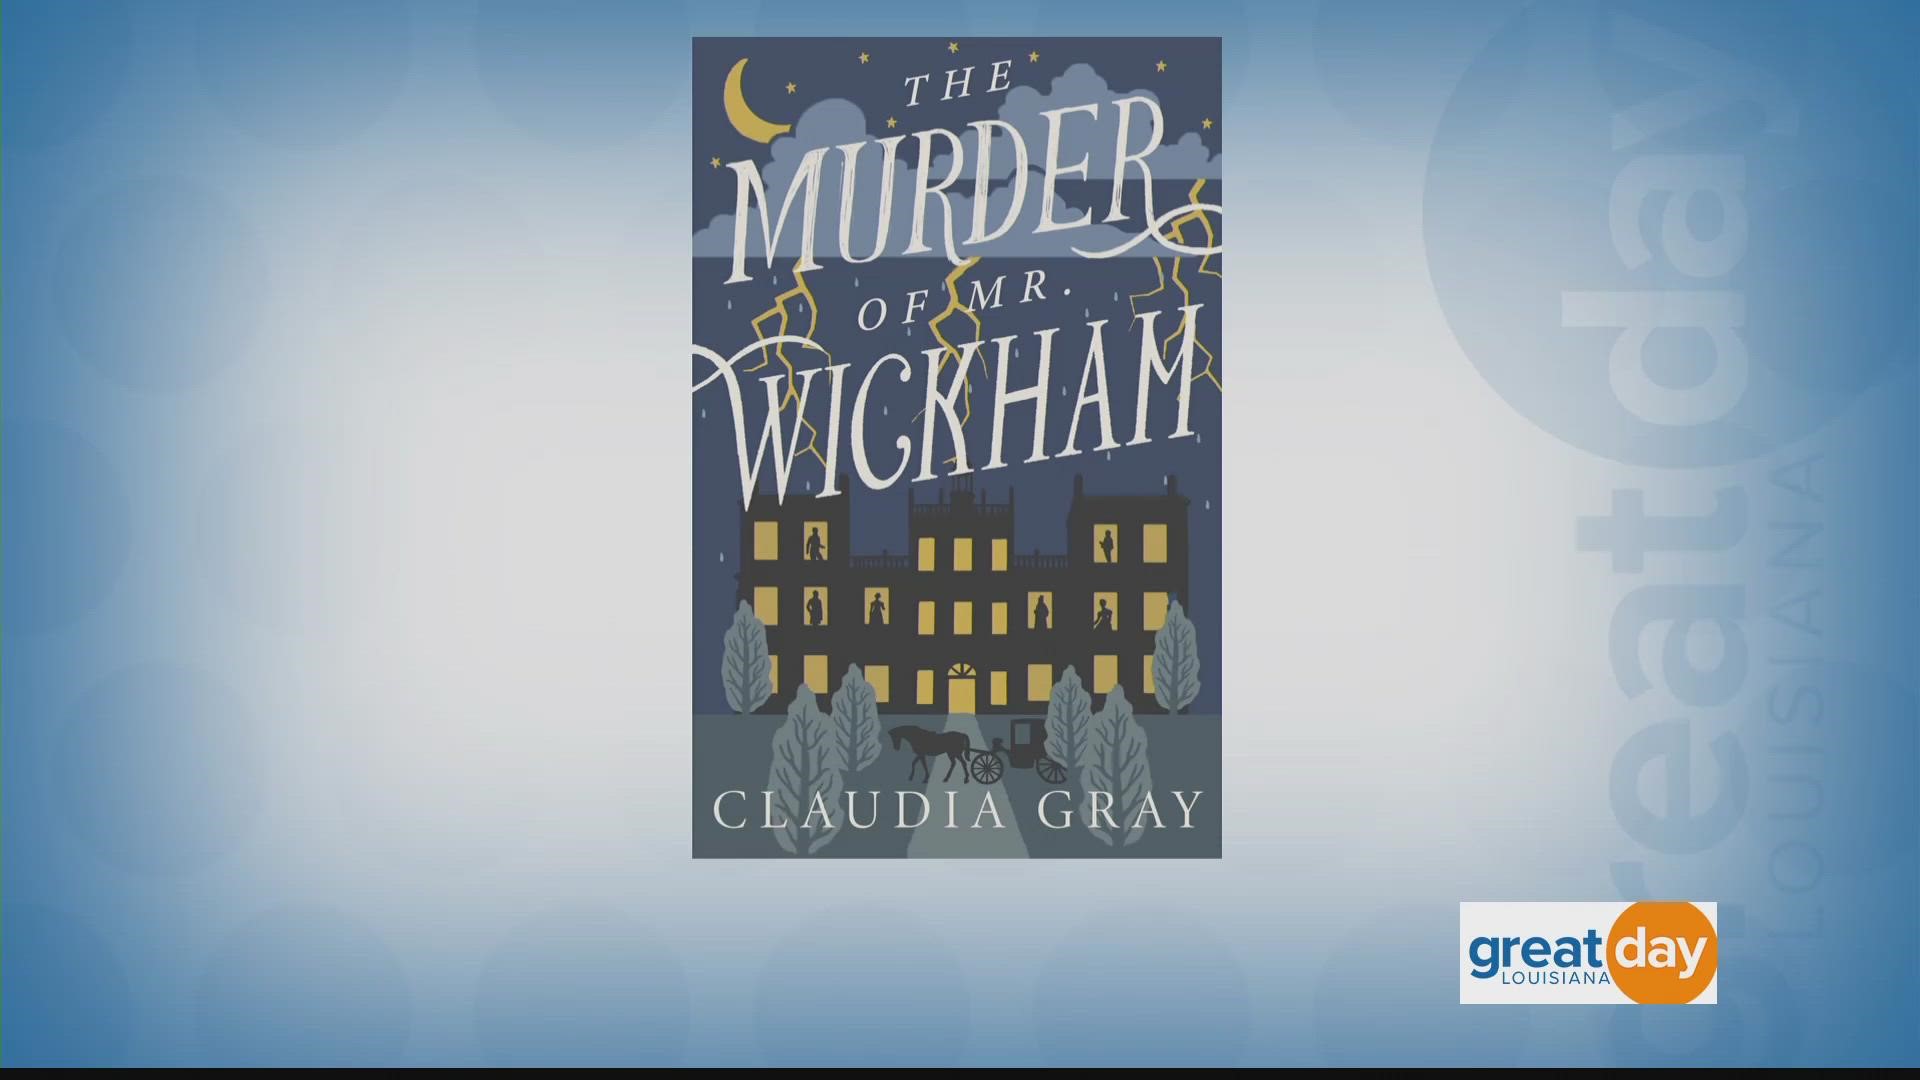 Author Claudia Gray talks about her cozy mystery series being featured at this year's New Orleans Book Festival.